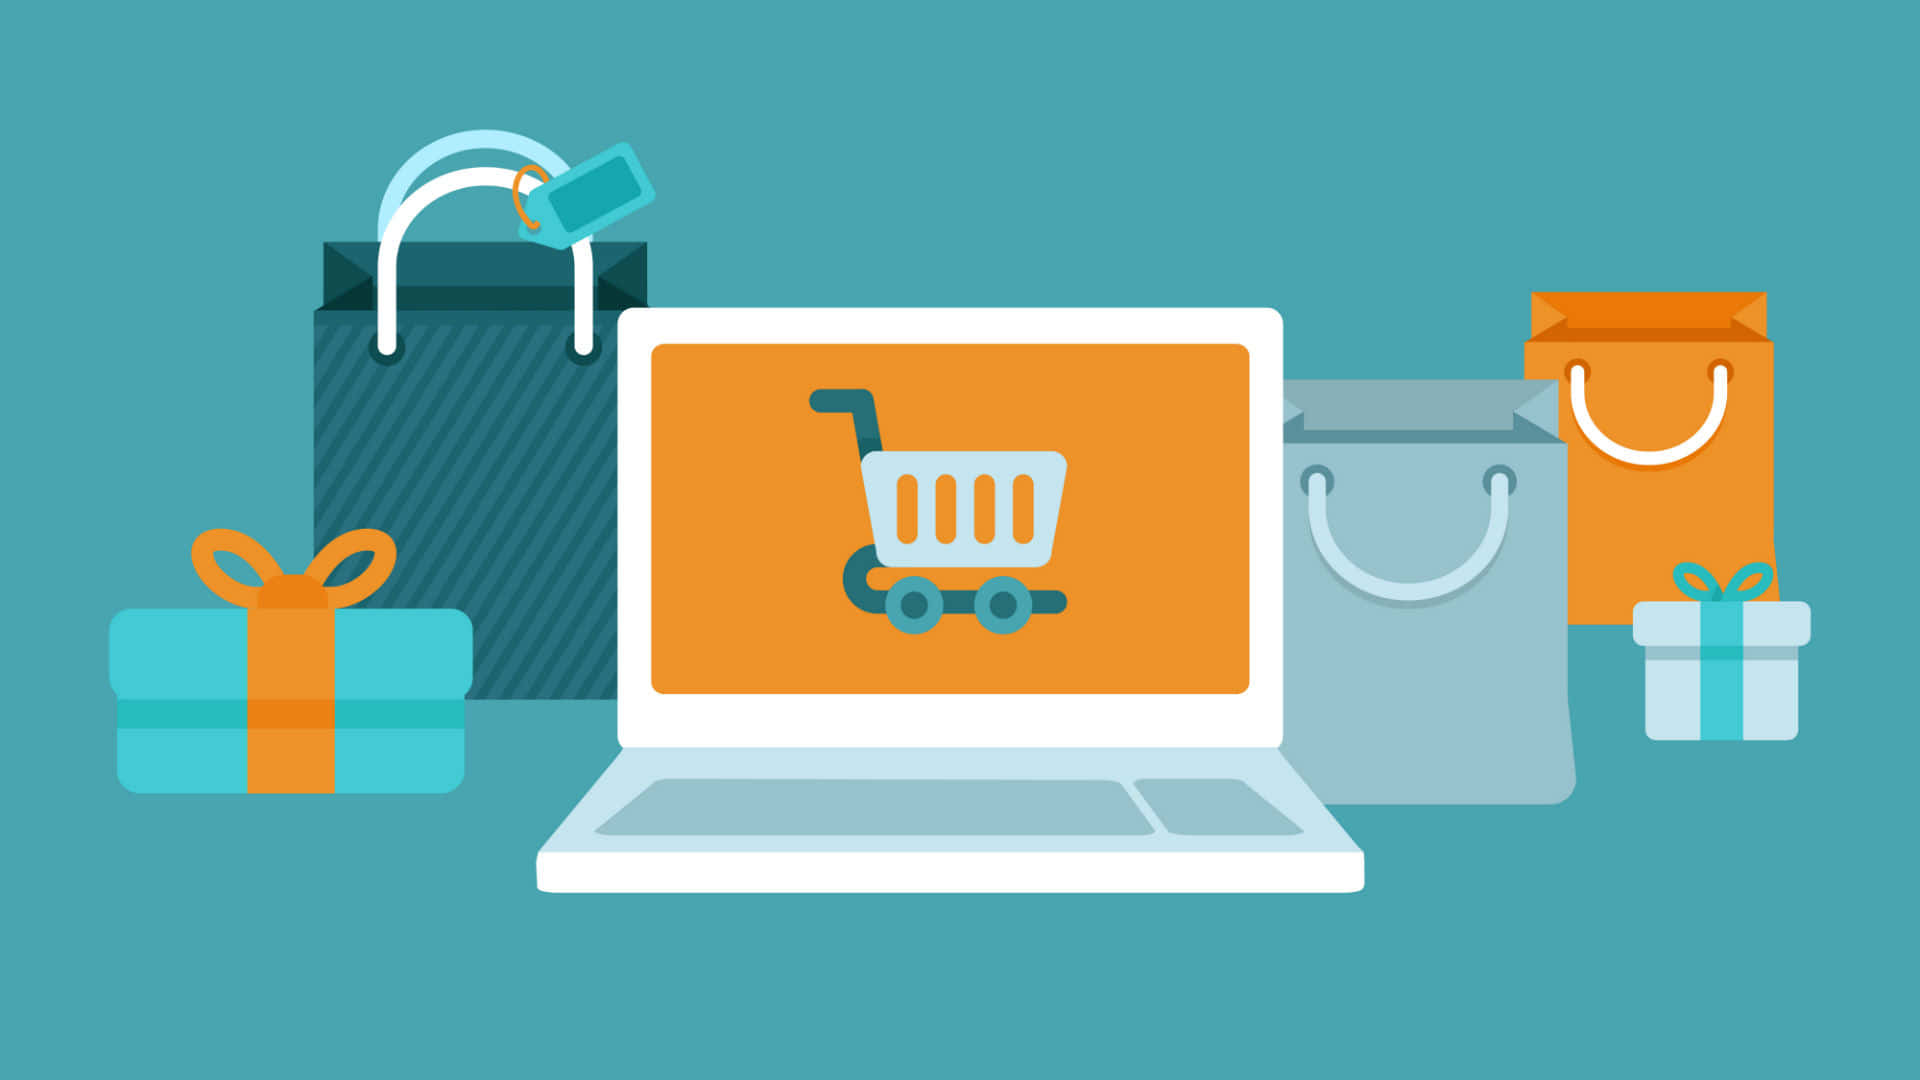 Be a part of online shopping revolution with E Commerce. Wallpaper